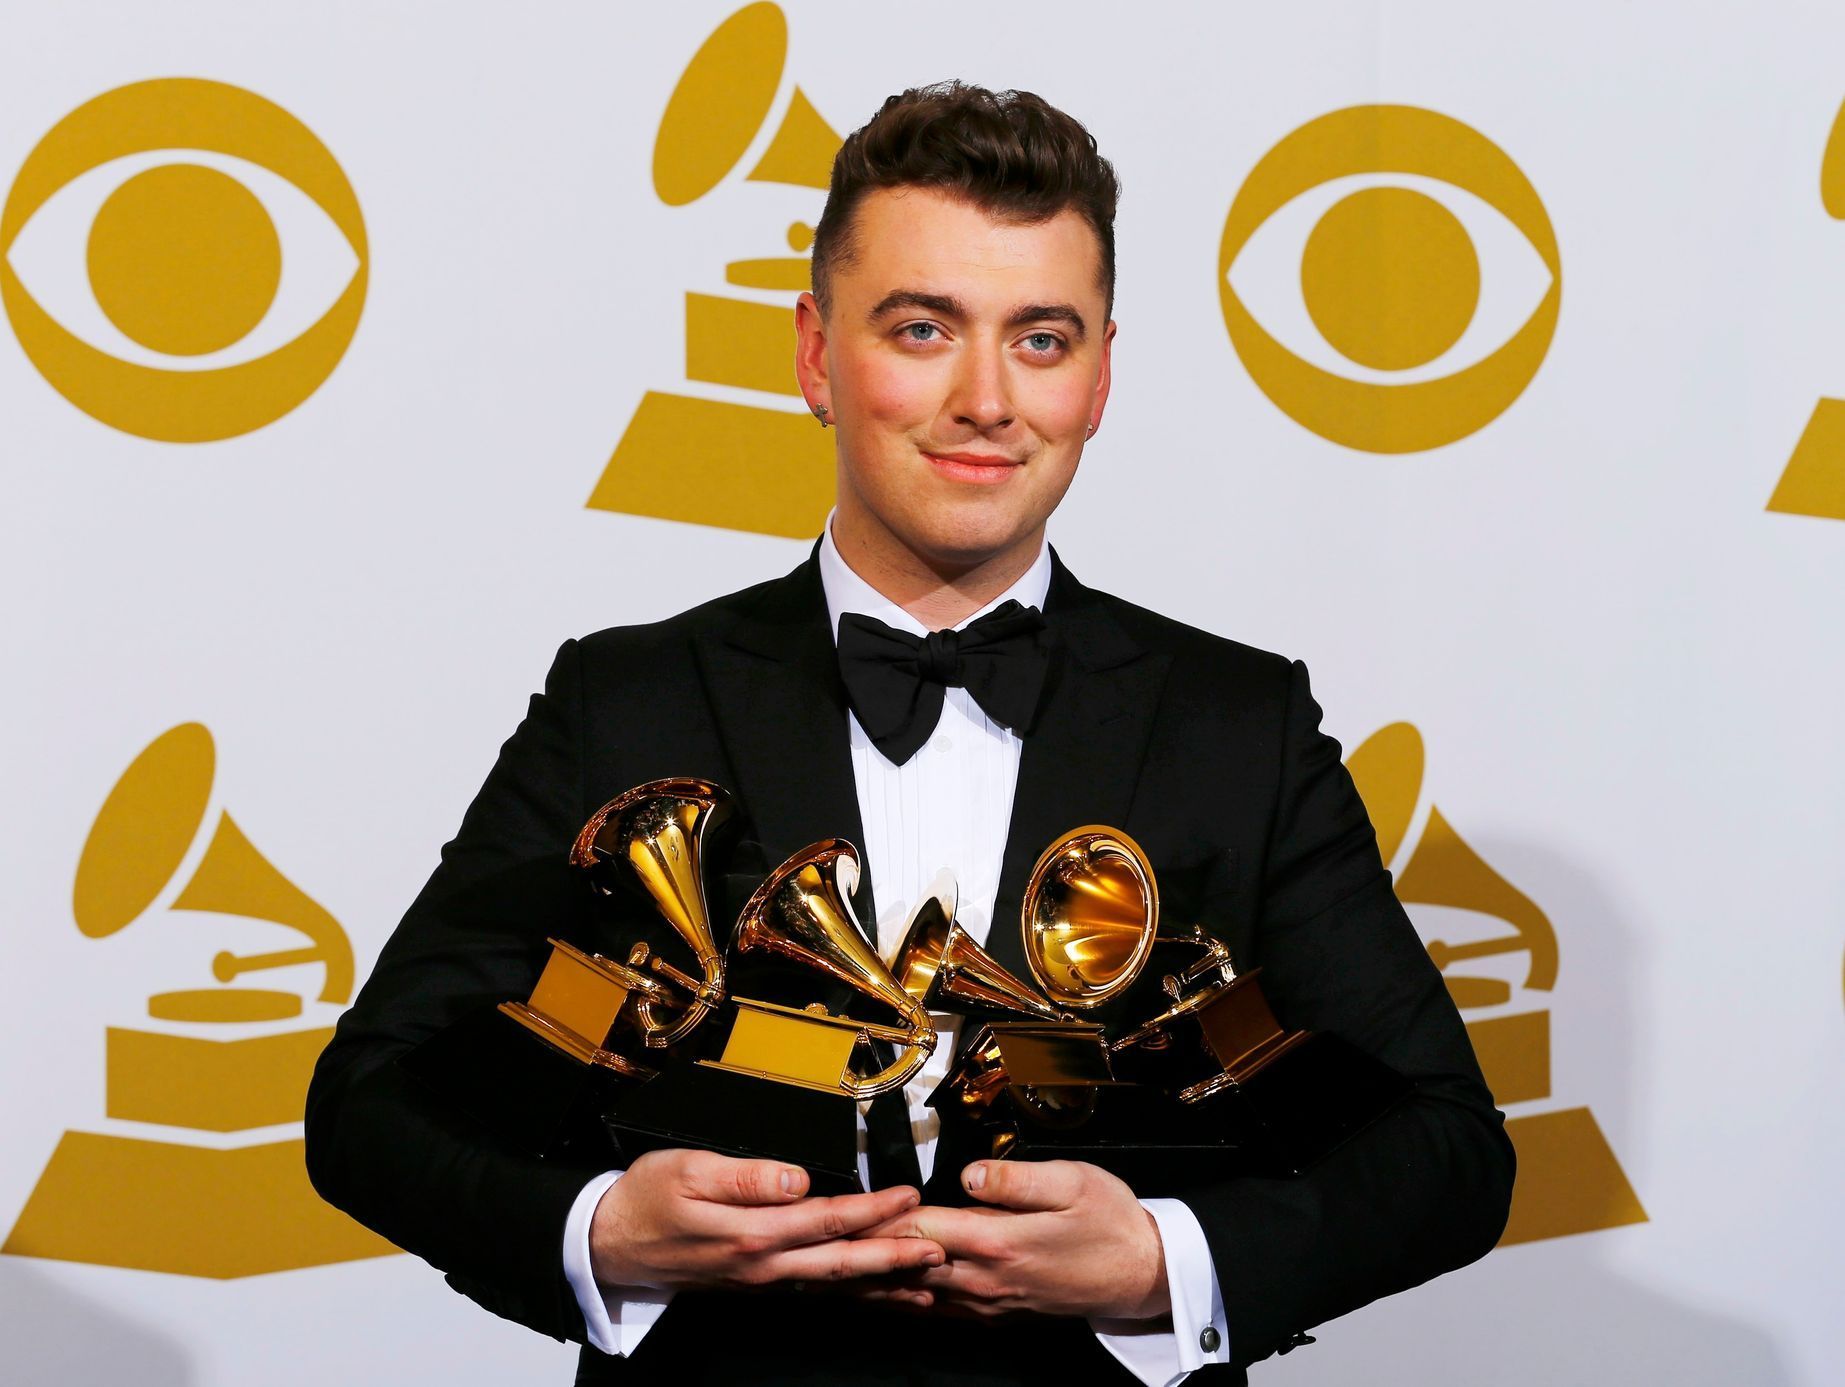 Sam Smith poses with his awards during the 57th annual Grammy Awards in Los Angeles